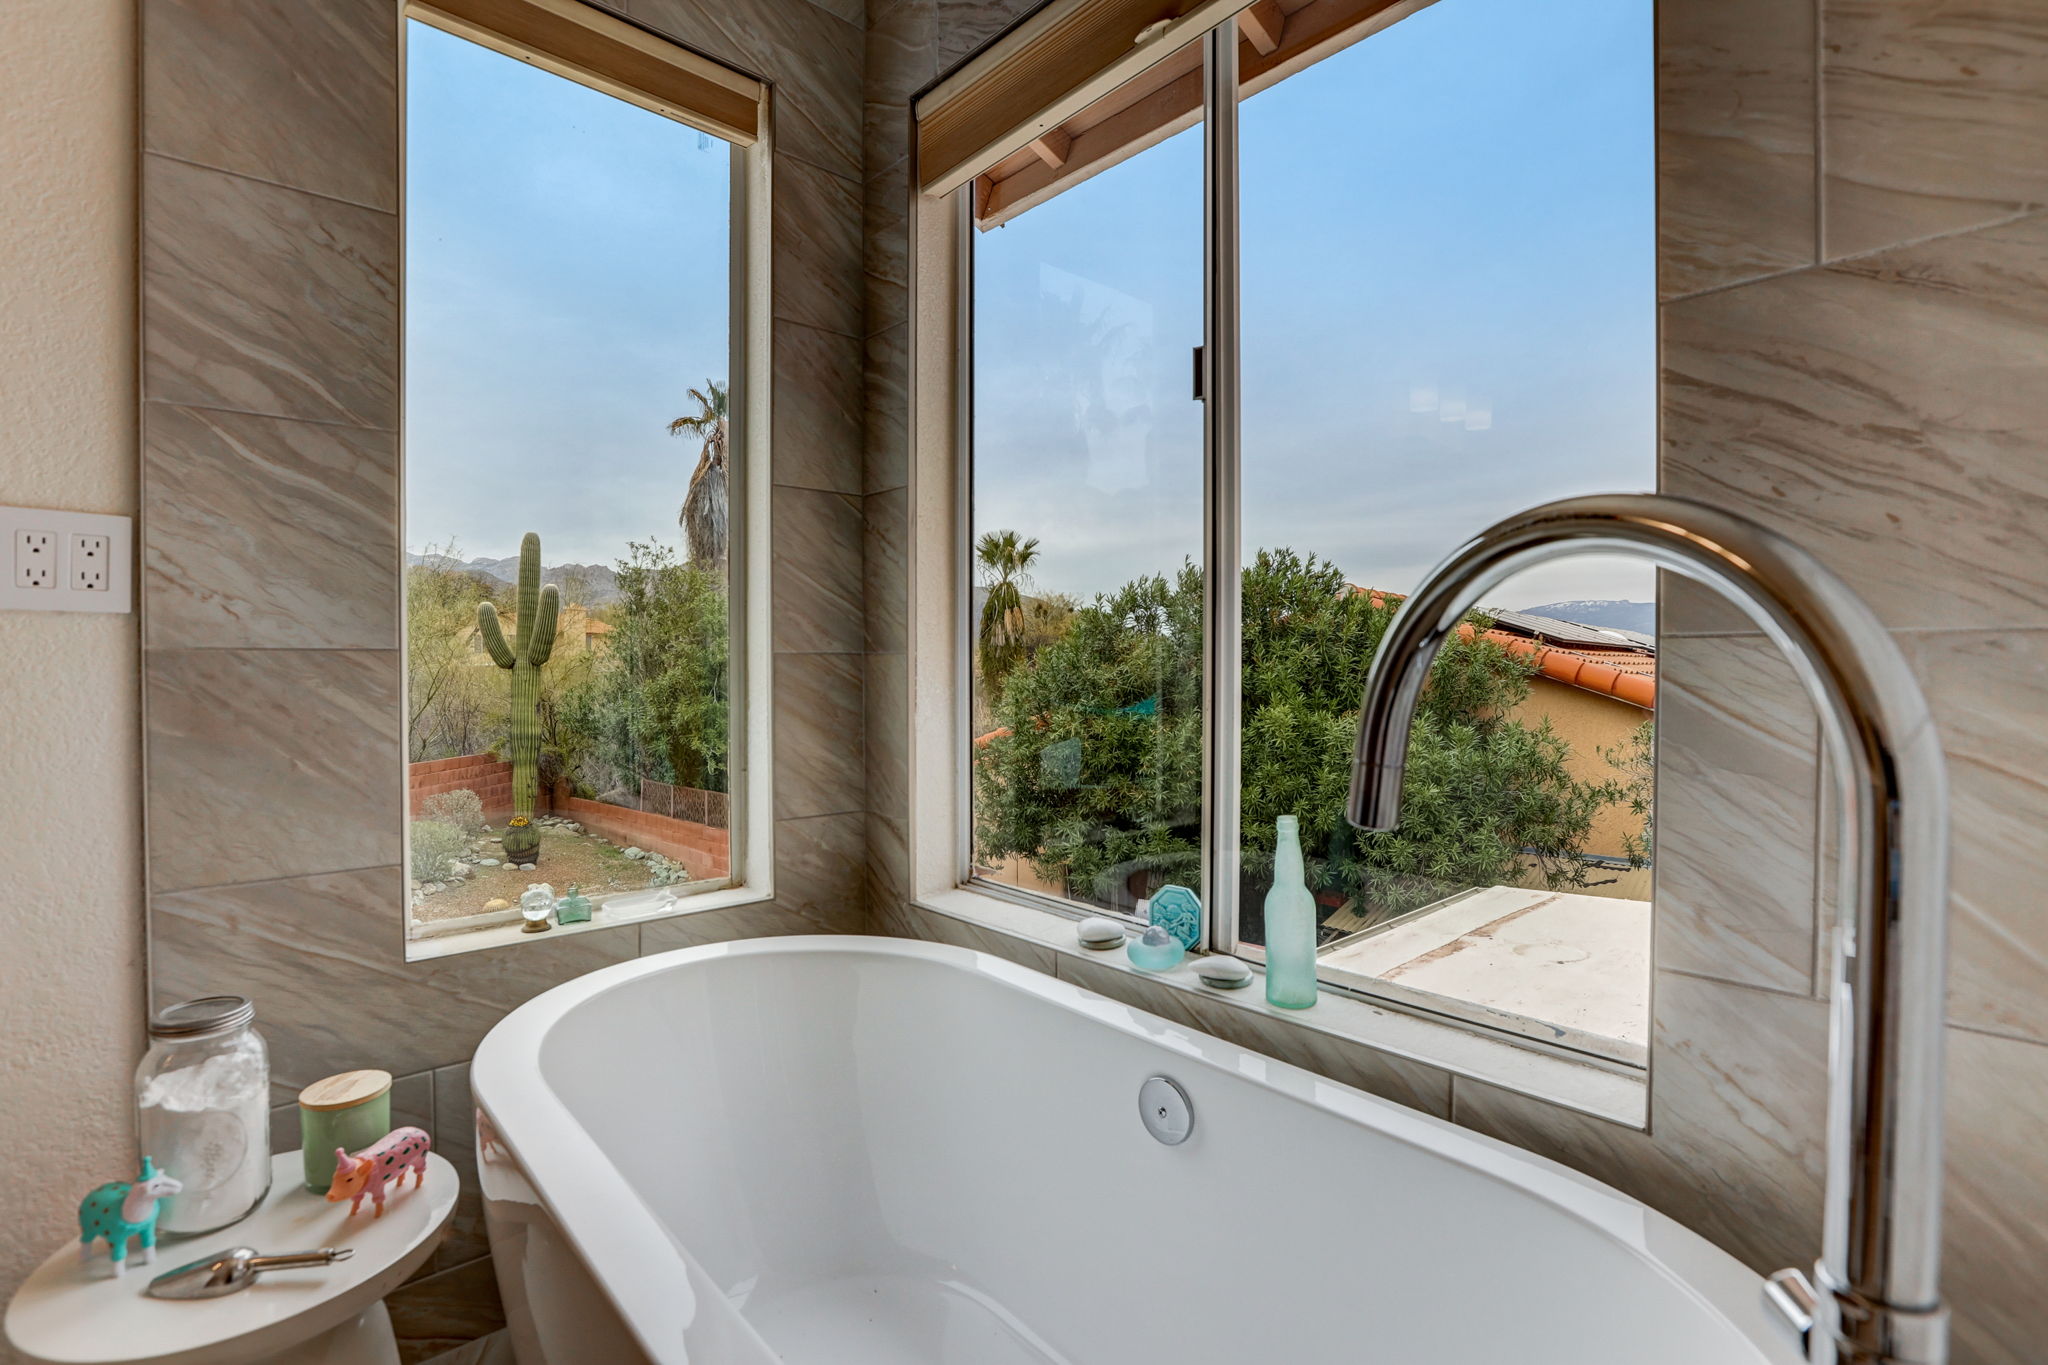 New Fiberglass Soaking Tub and Fixtures with Mountain Views